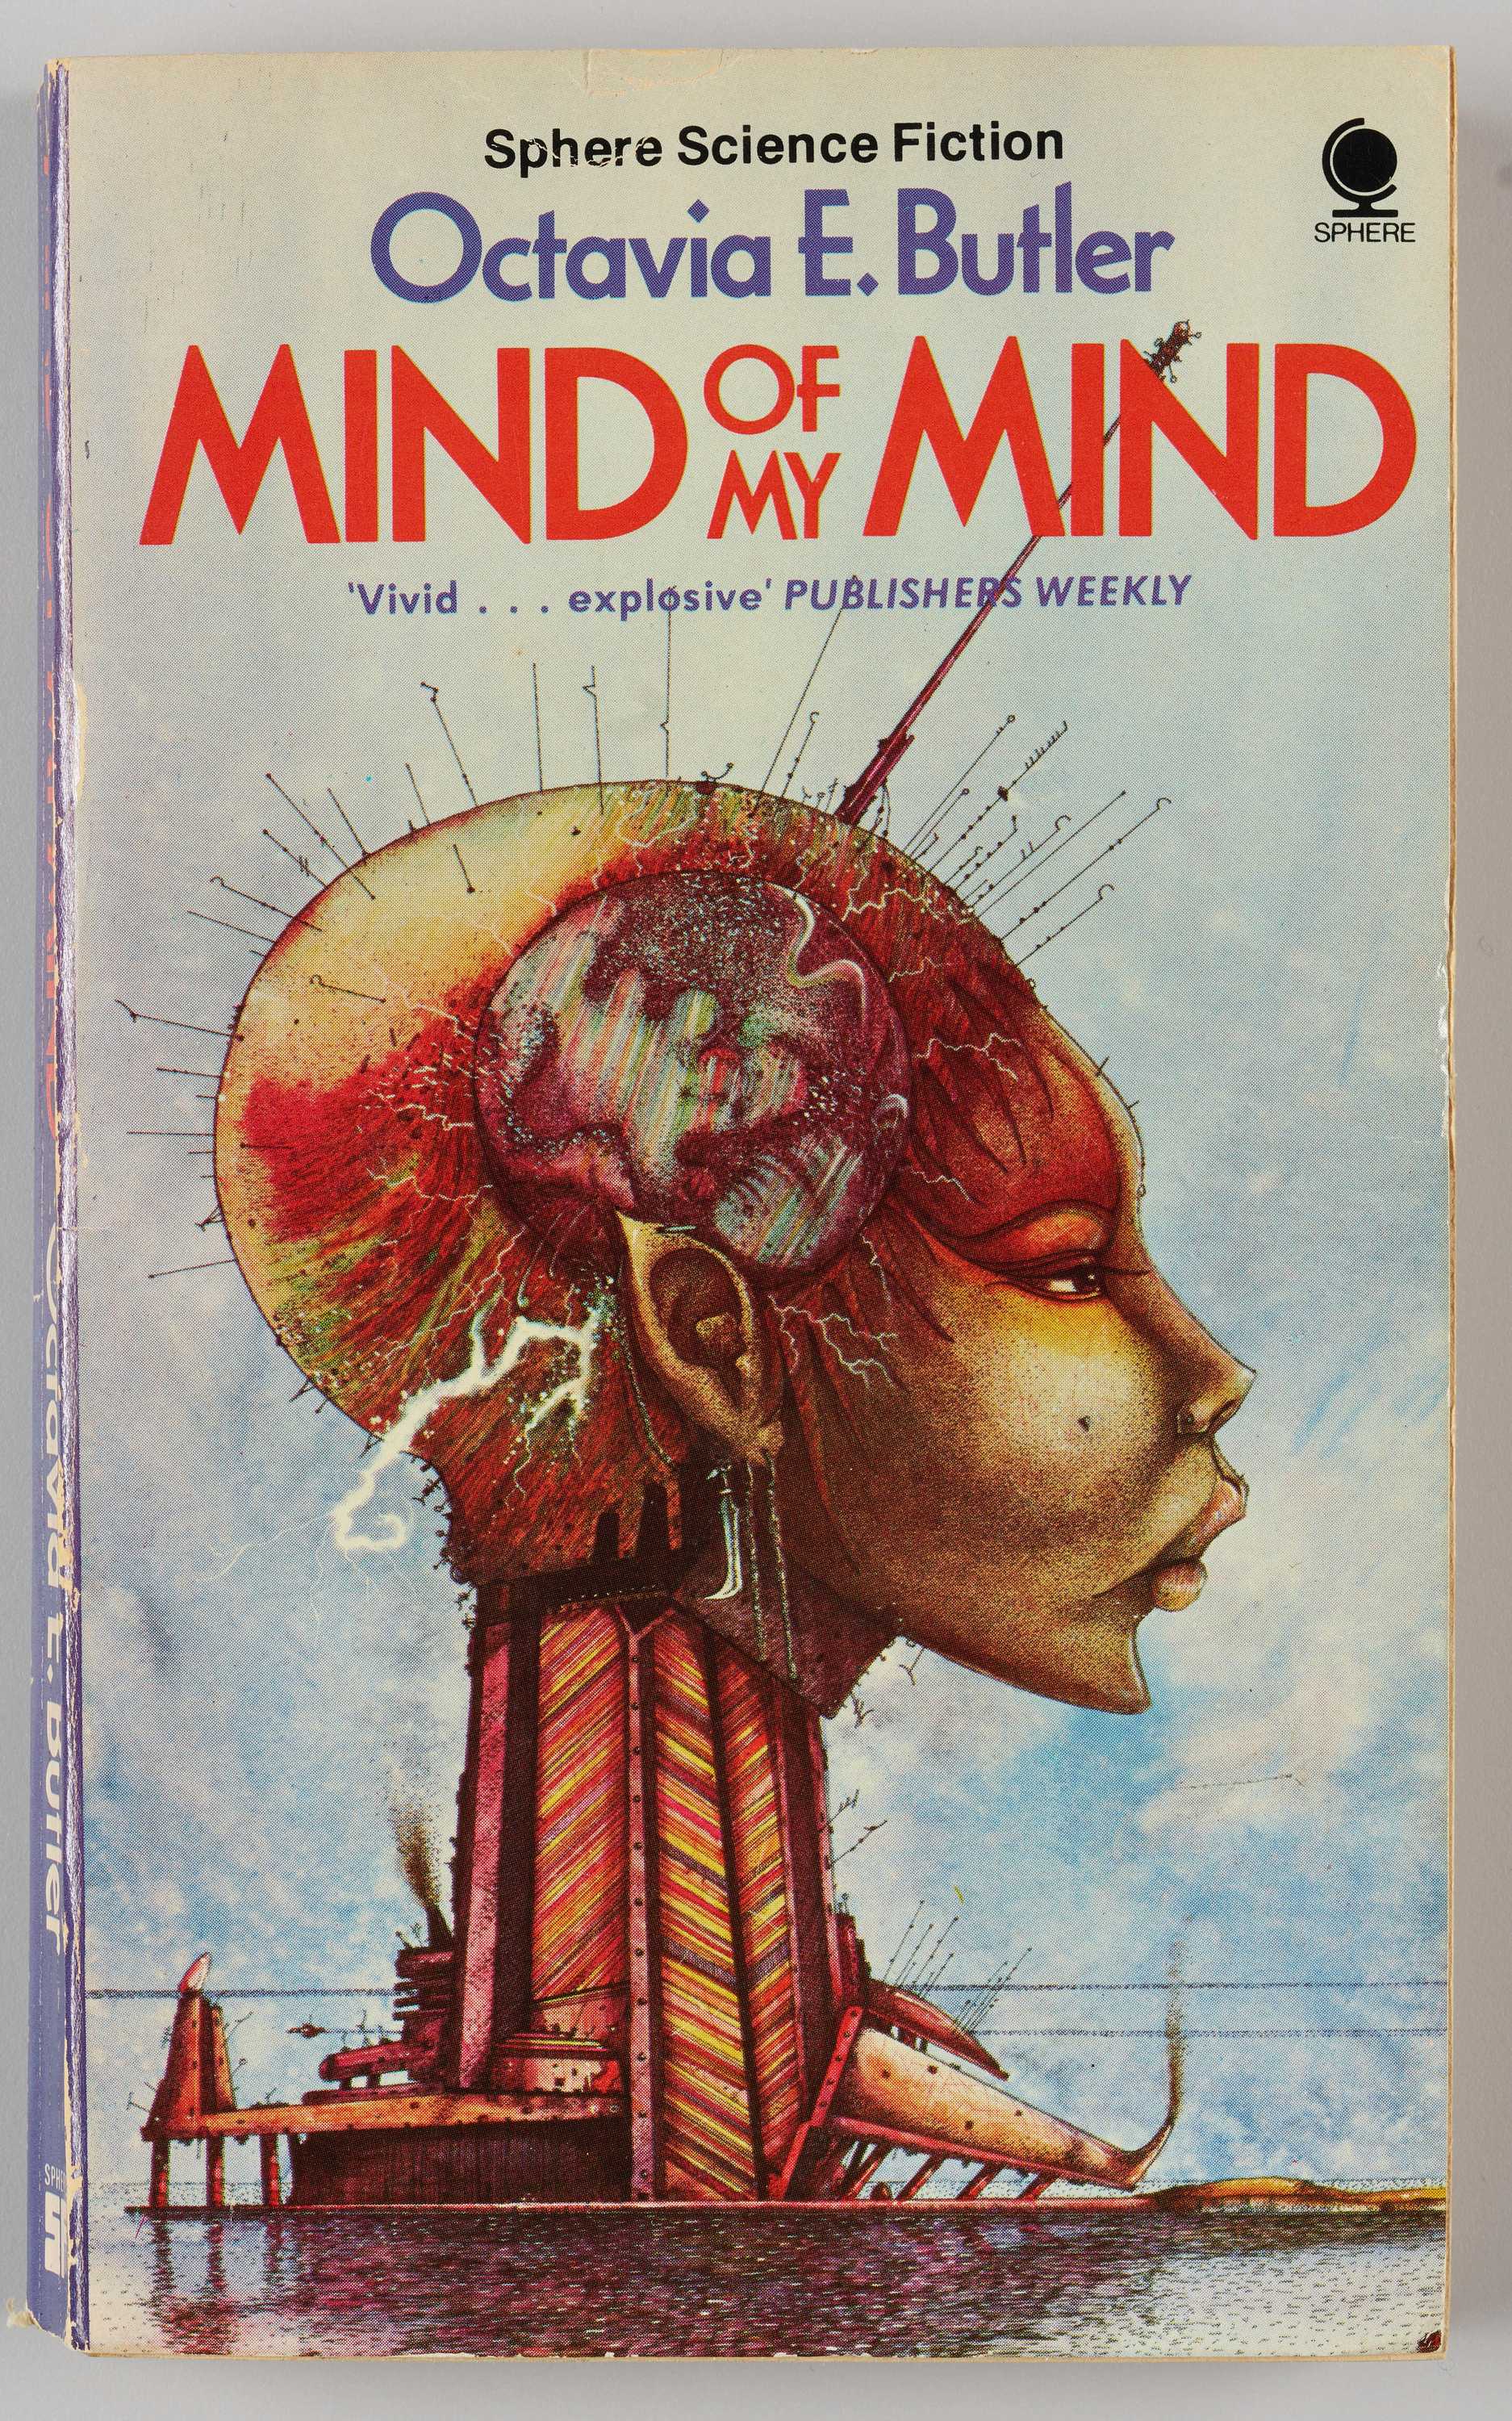 Cover of Octavia E. Butler's 'Mind of My Mind", which has an illustration of mechanical-looking woman.